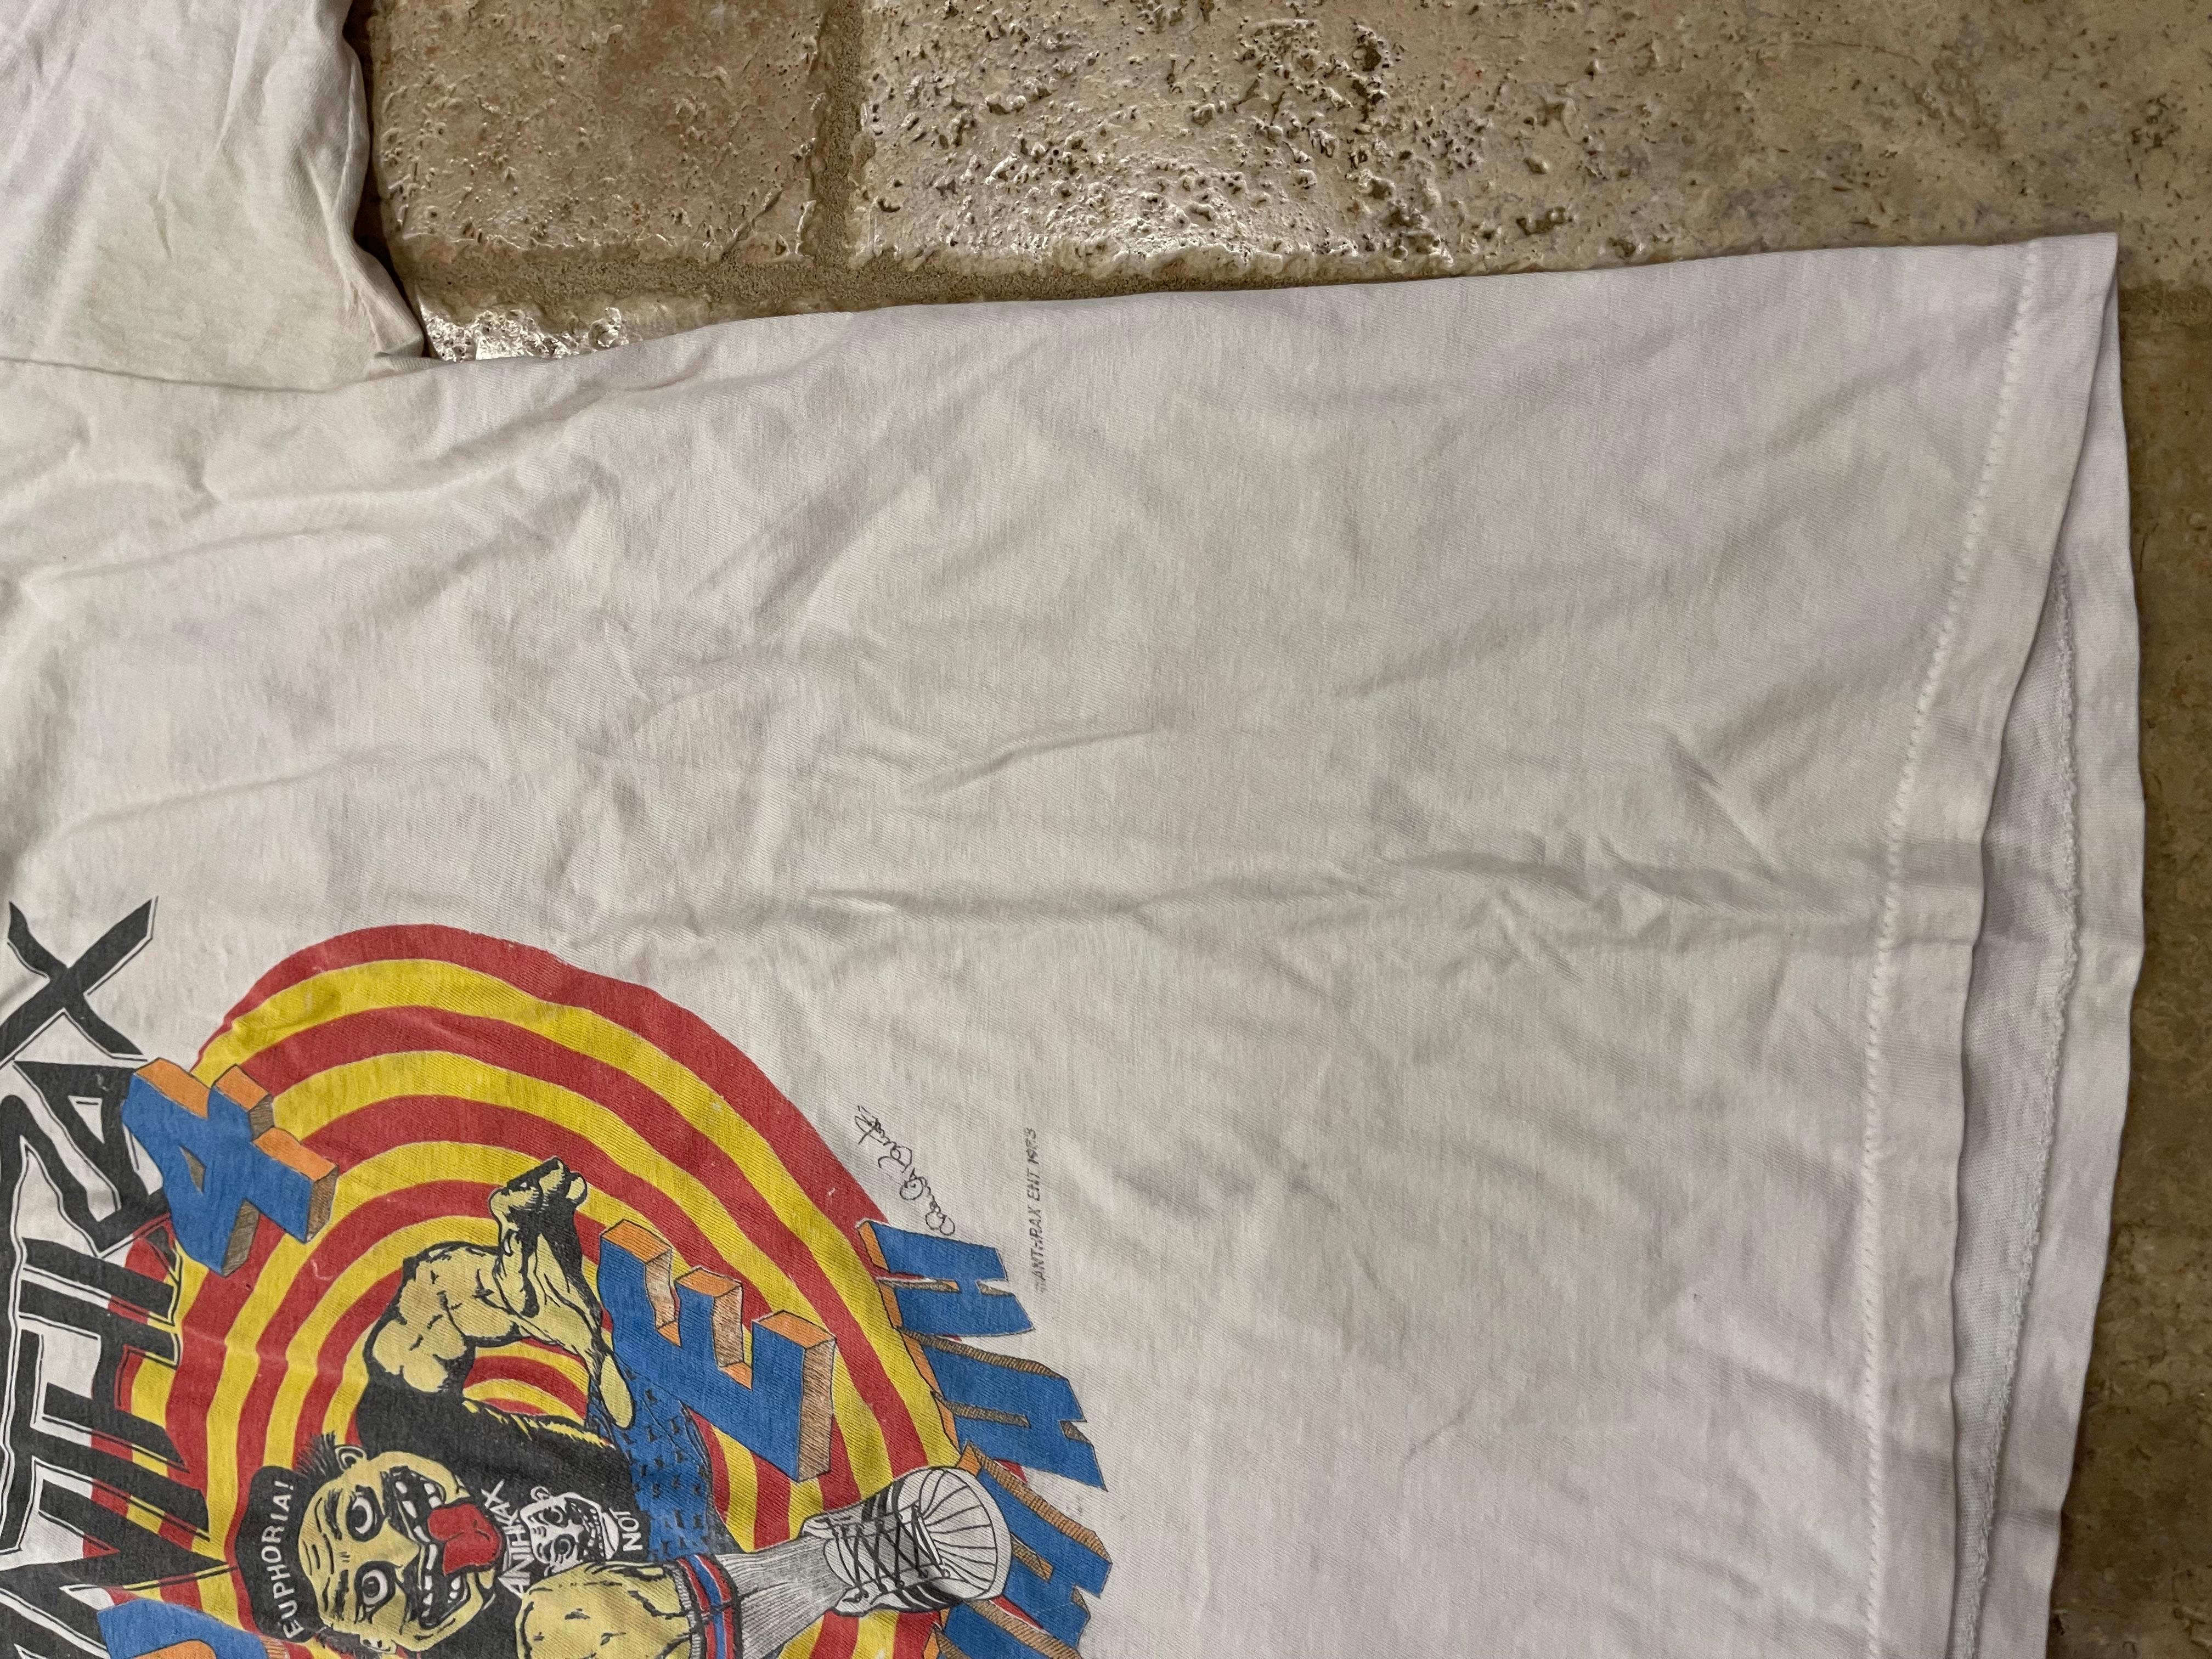 Gallery Dept. Vintage ANTHRAX Band Tee In Fair Condition For Sale In Bear, DE